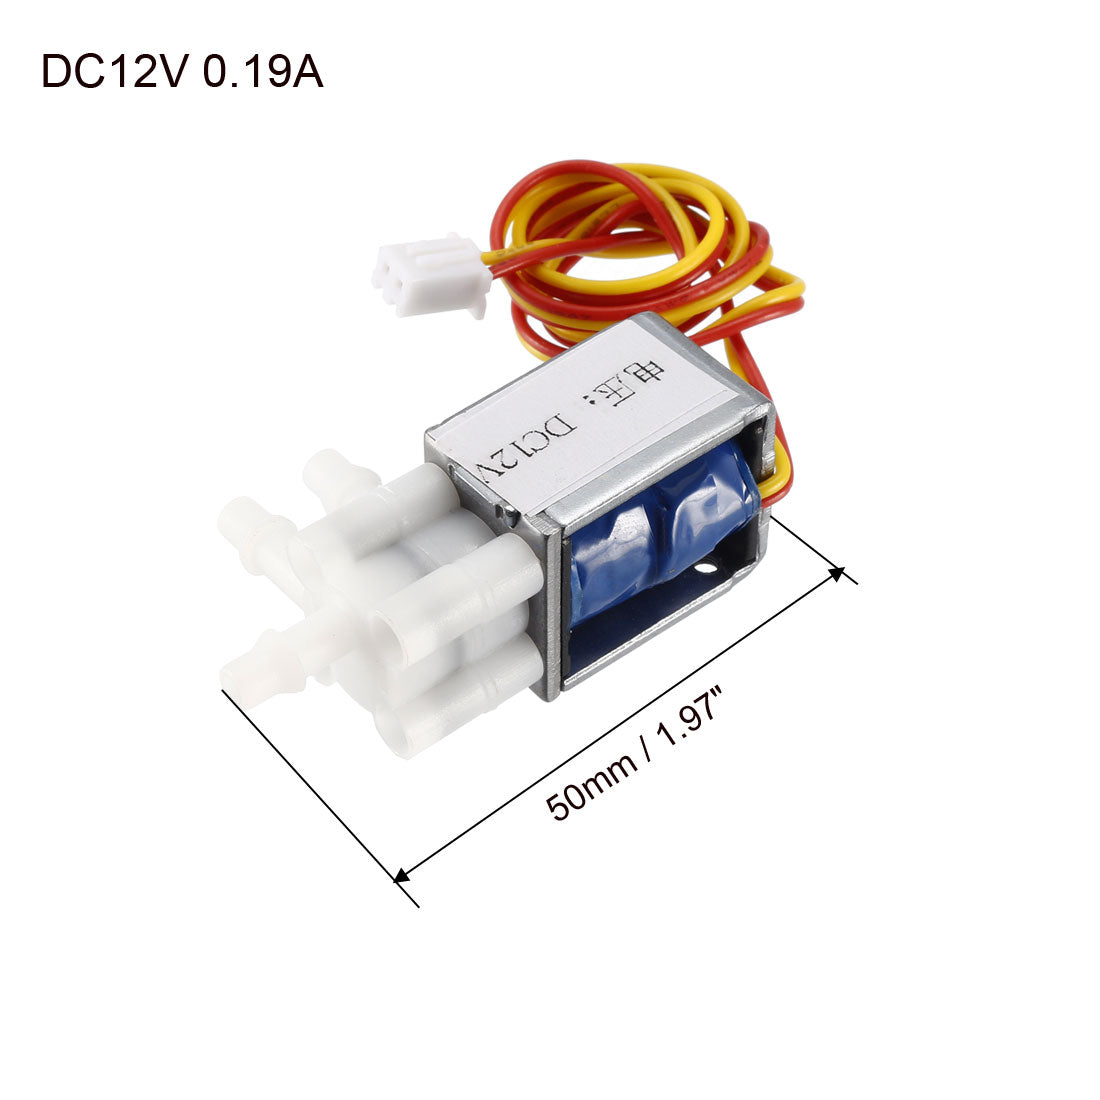 uxcell Uxcell Mini Solenoid Valve 2 Position 3 Way Normally Open DC12V 0.19A Water Air Solenoid Valve